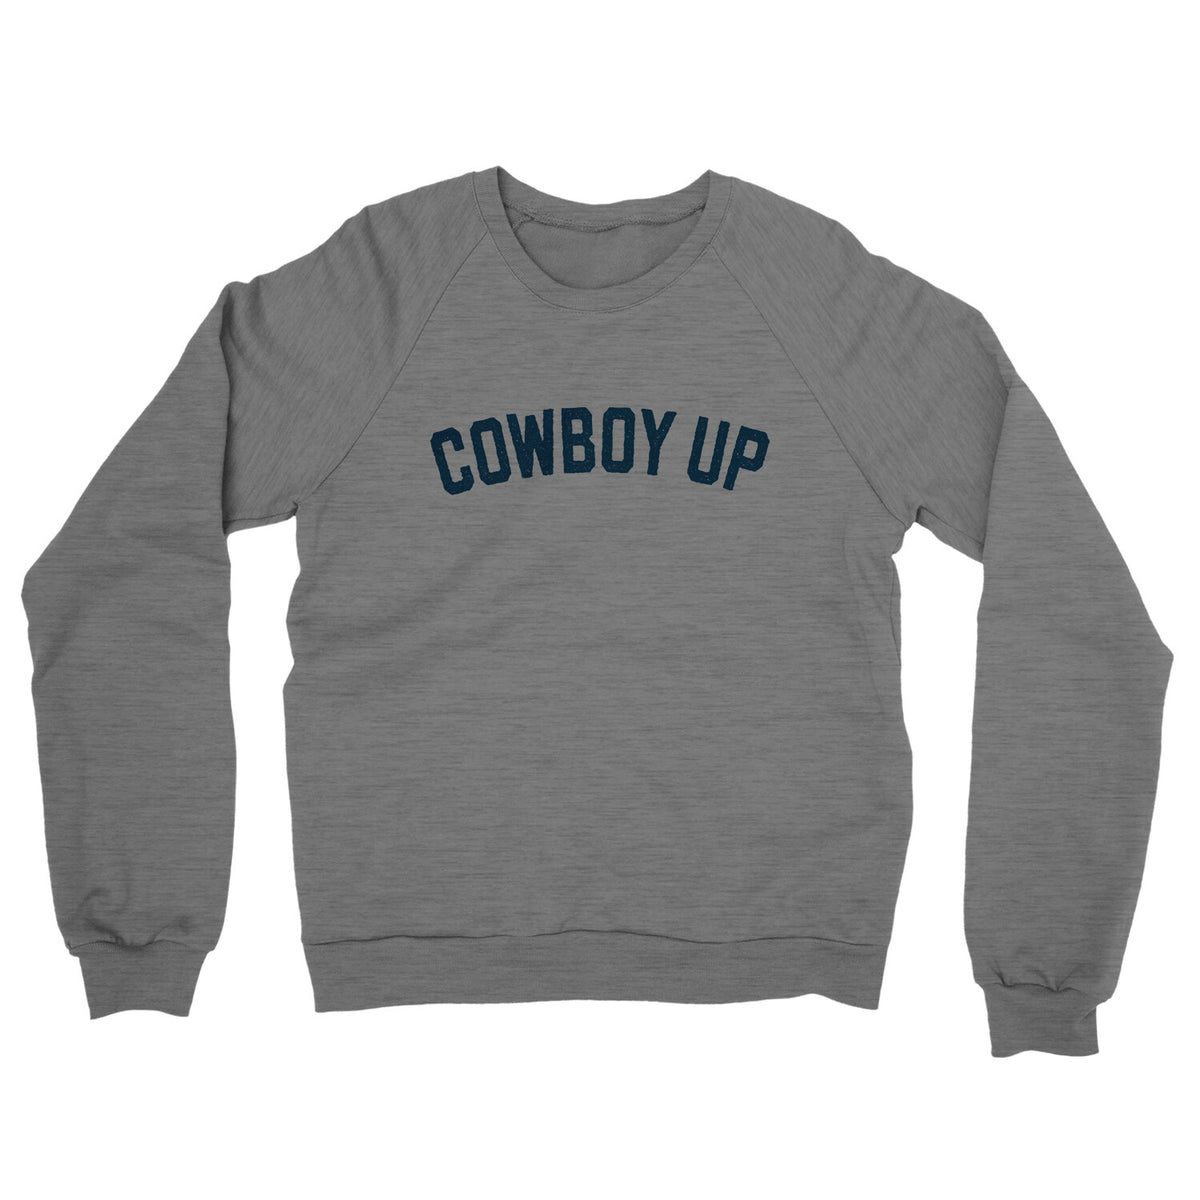 Cowboy Up in Graphite Heather Color